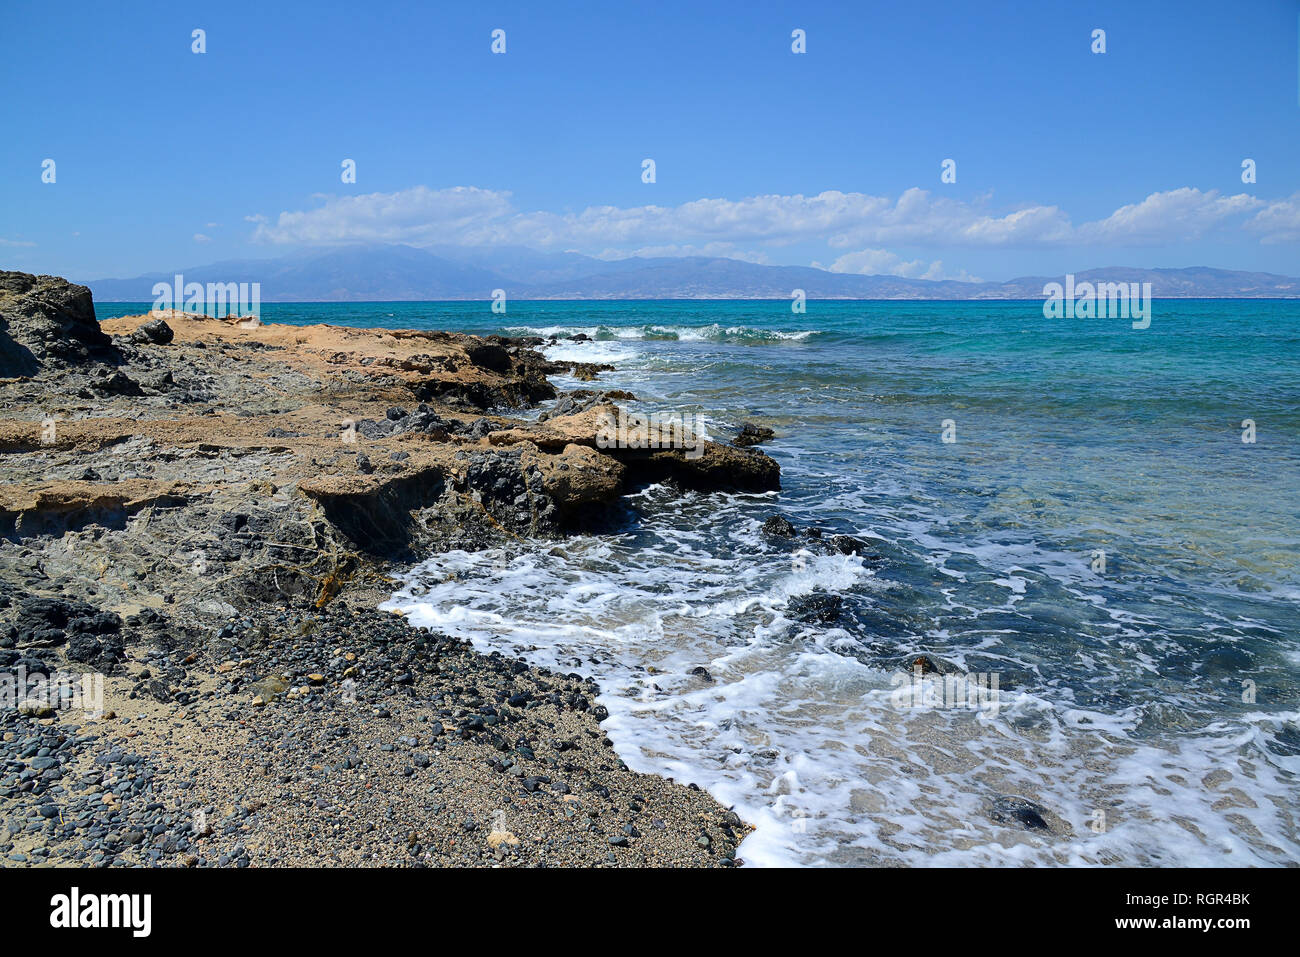 rocky shore, blue sea, mountains in the distance in the clouds Stock Photo